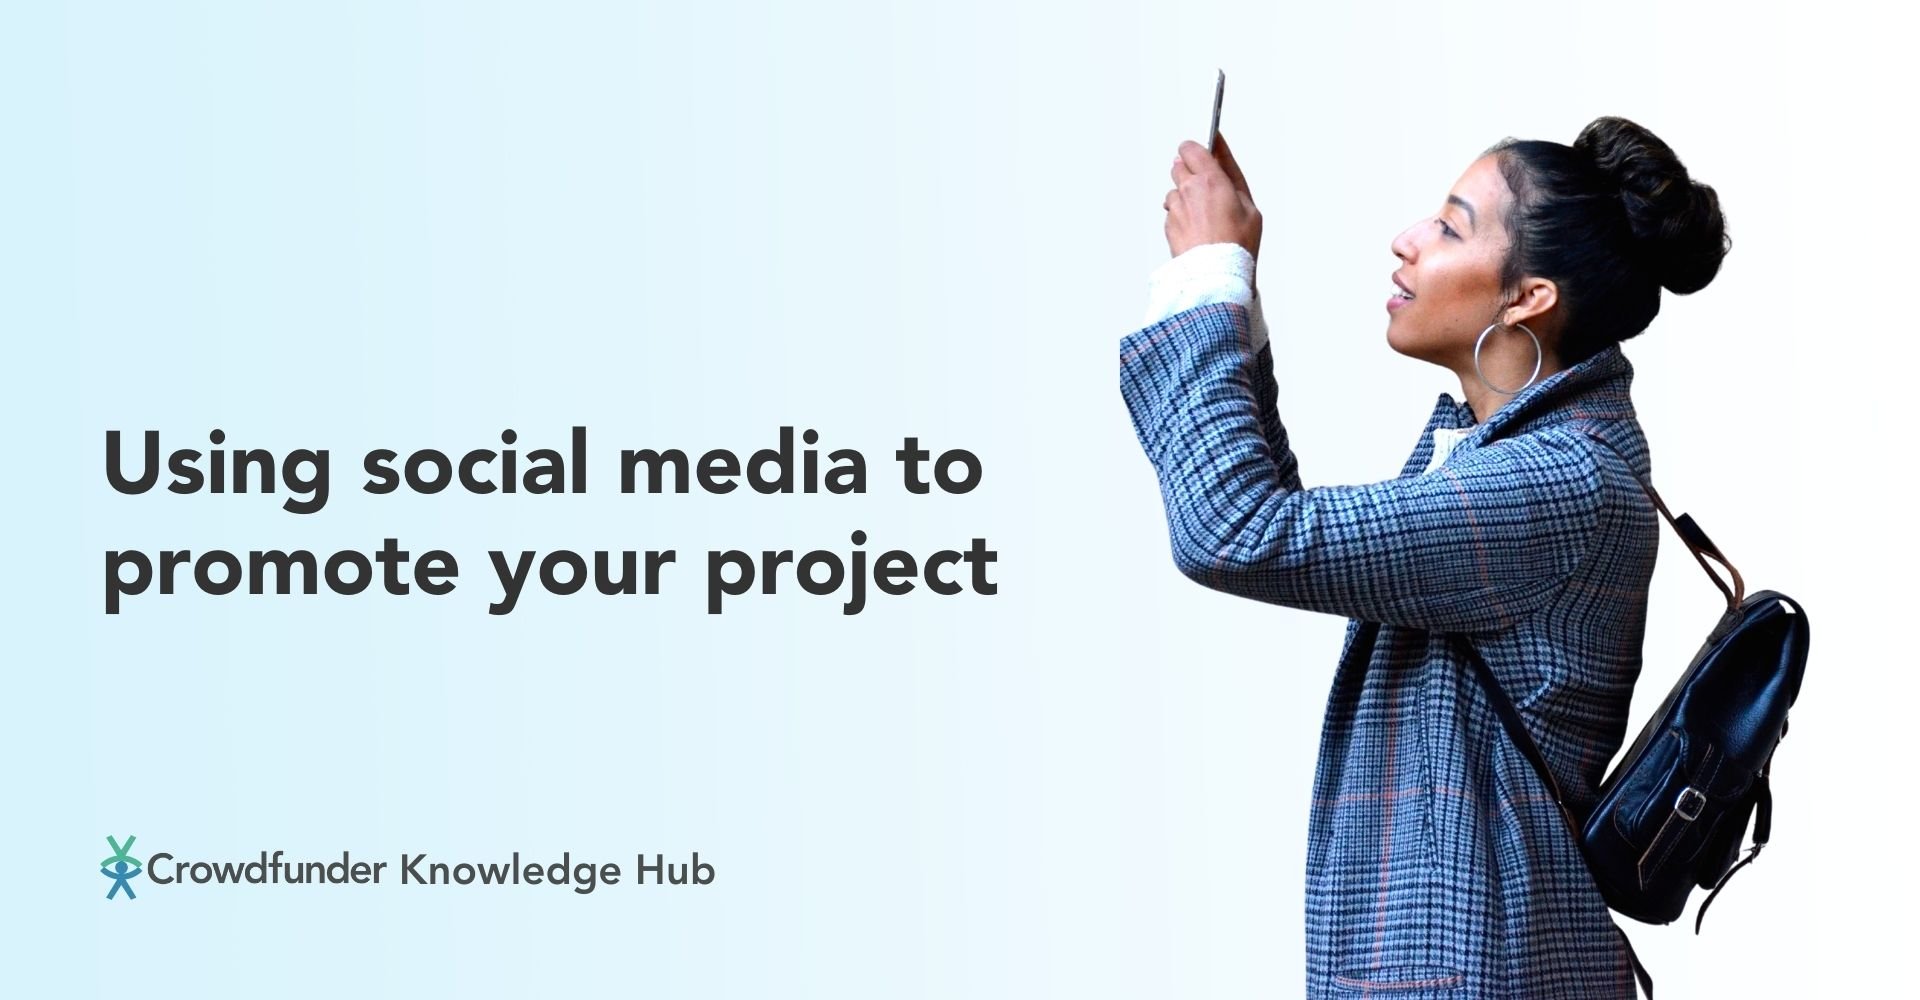 Using social media to promote your project